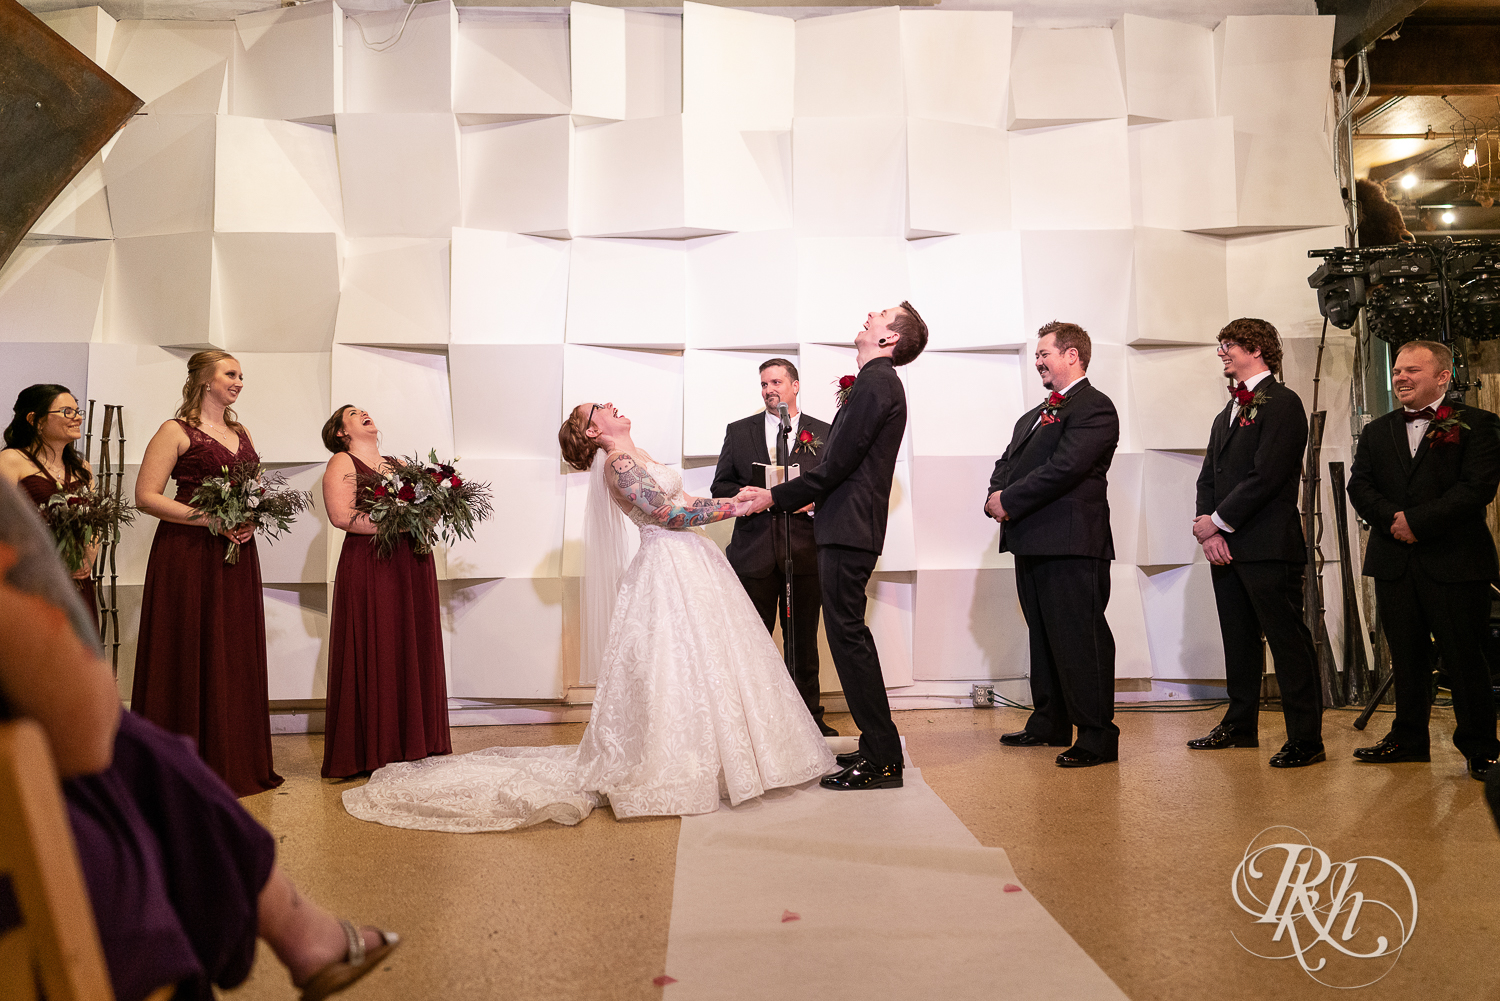 Bride and groom laughing at alter during wedding ceremony at Warehouse Winery in Saint Louis Park, Minnesota.